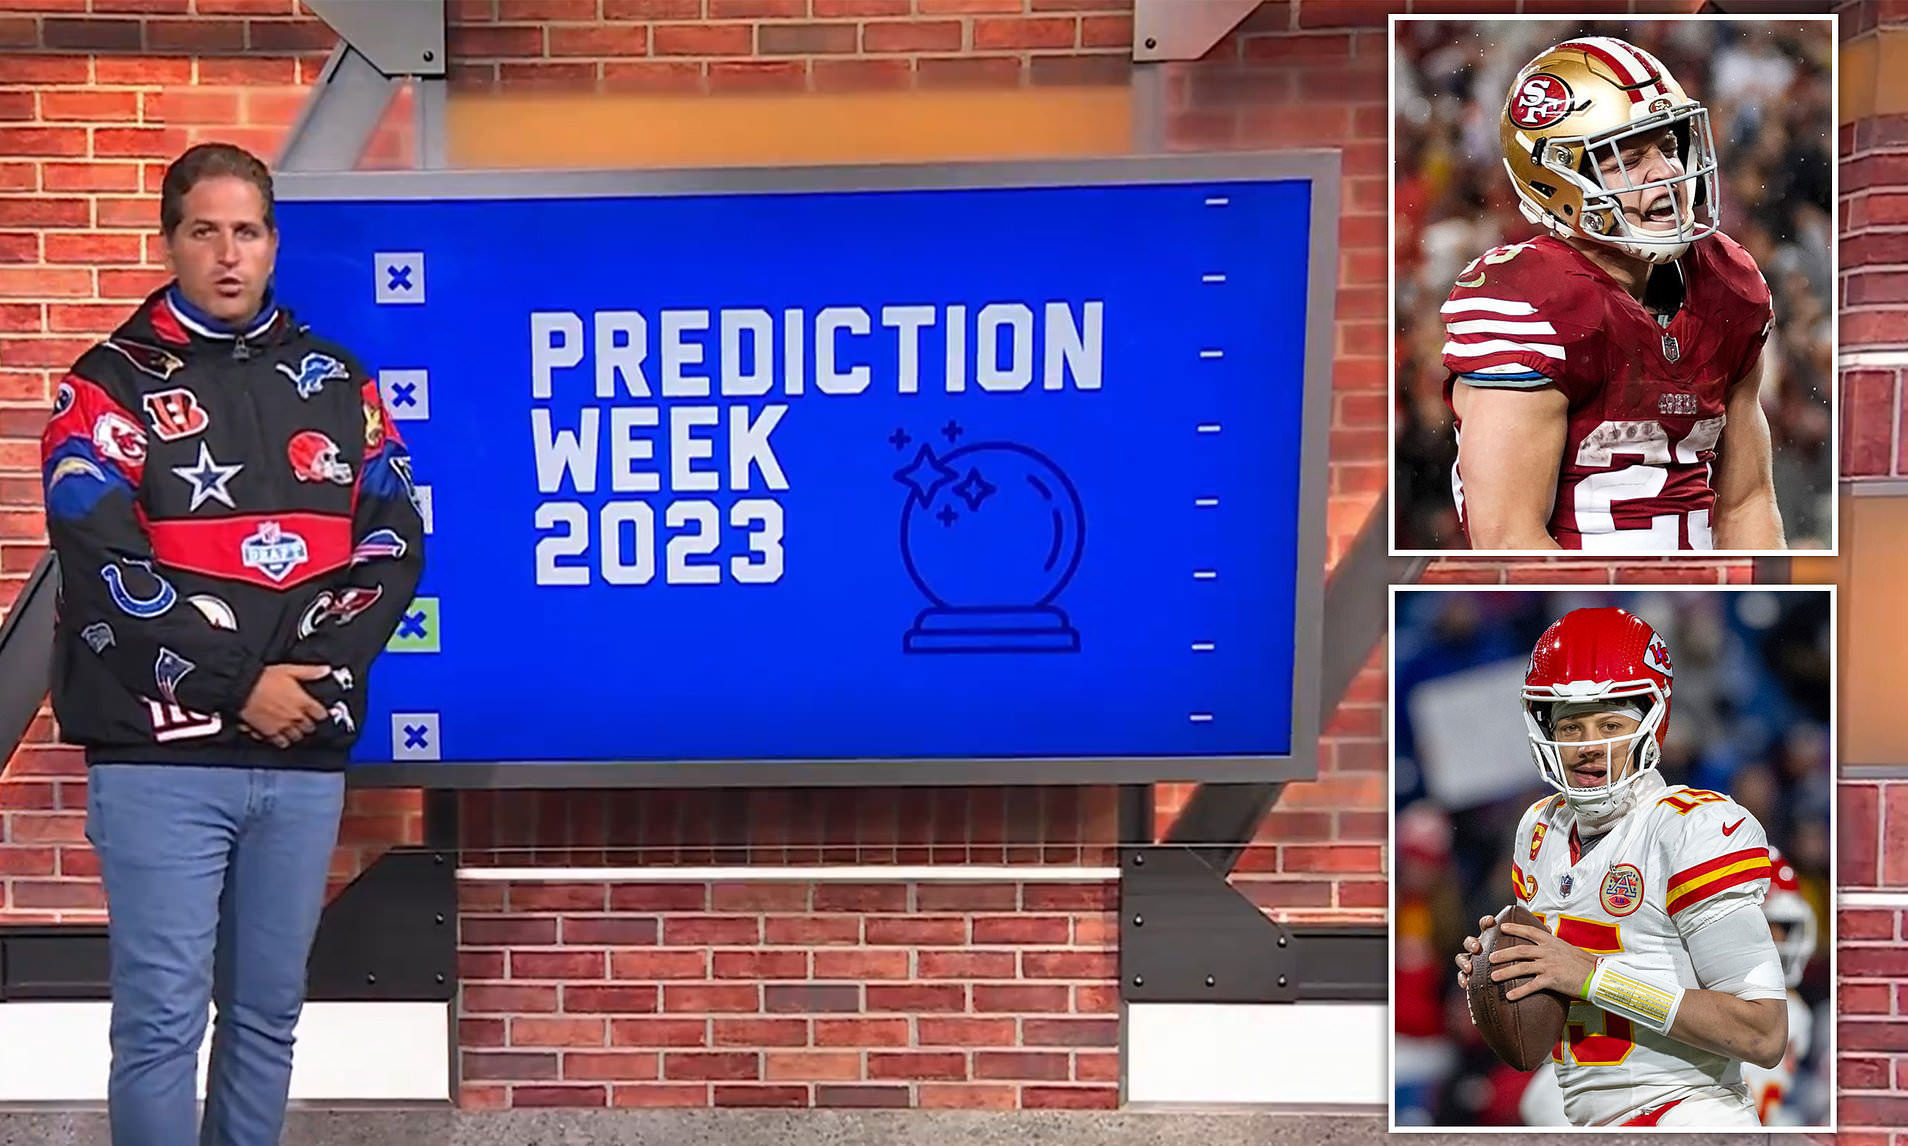 Peter Schrager has predicted the Super Bowl winner for five years